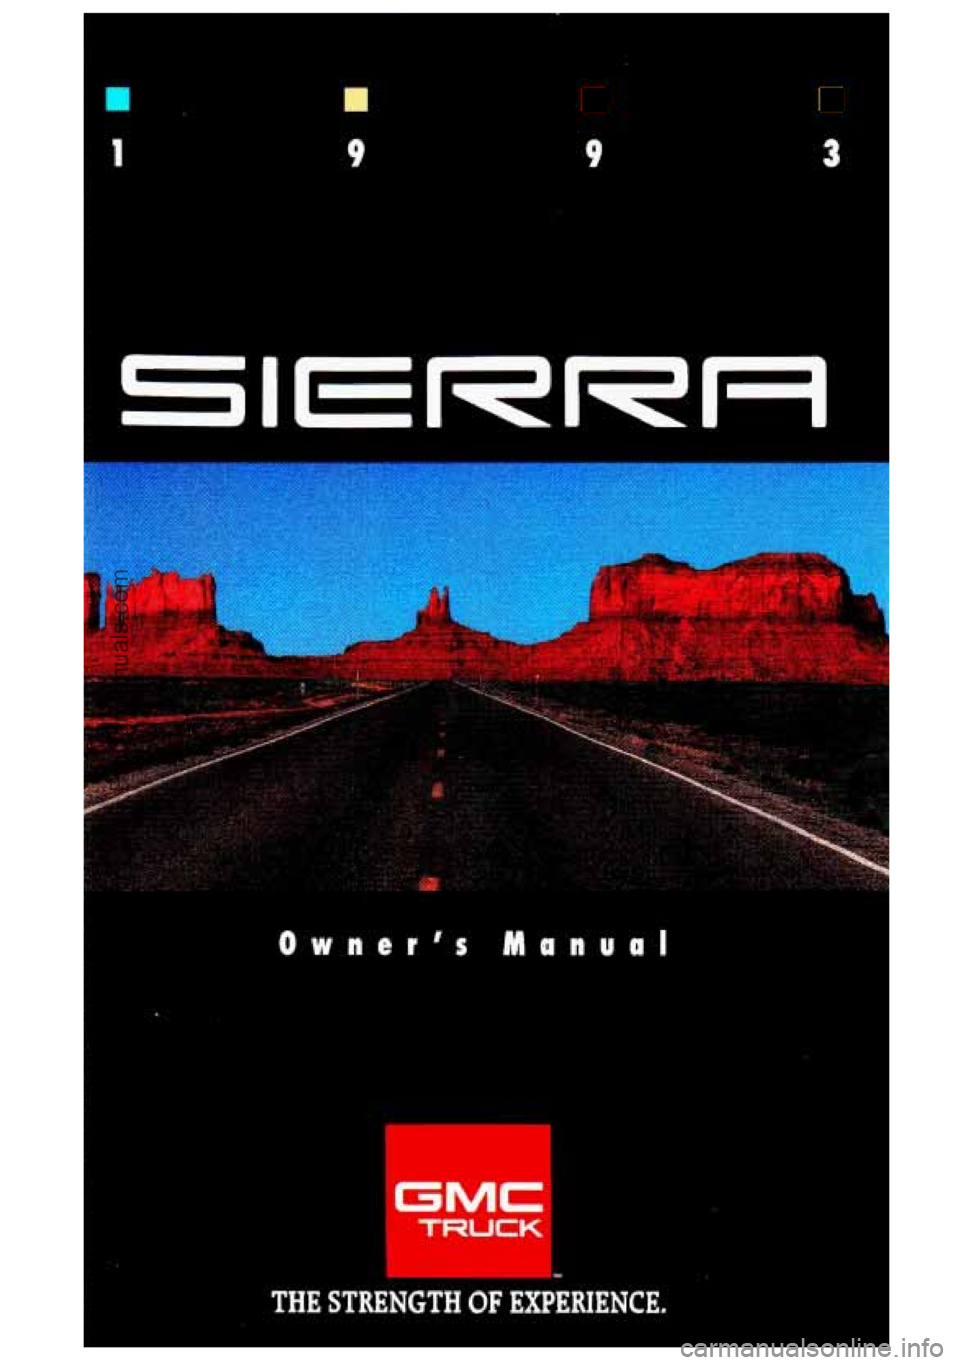 GMC SIERRA 1993  Owners Manual rn 
9 9 3 
Owners Manual 
1 
THE  STRENGTH OF EXPERIENCE. 
ProCarManuals.com 